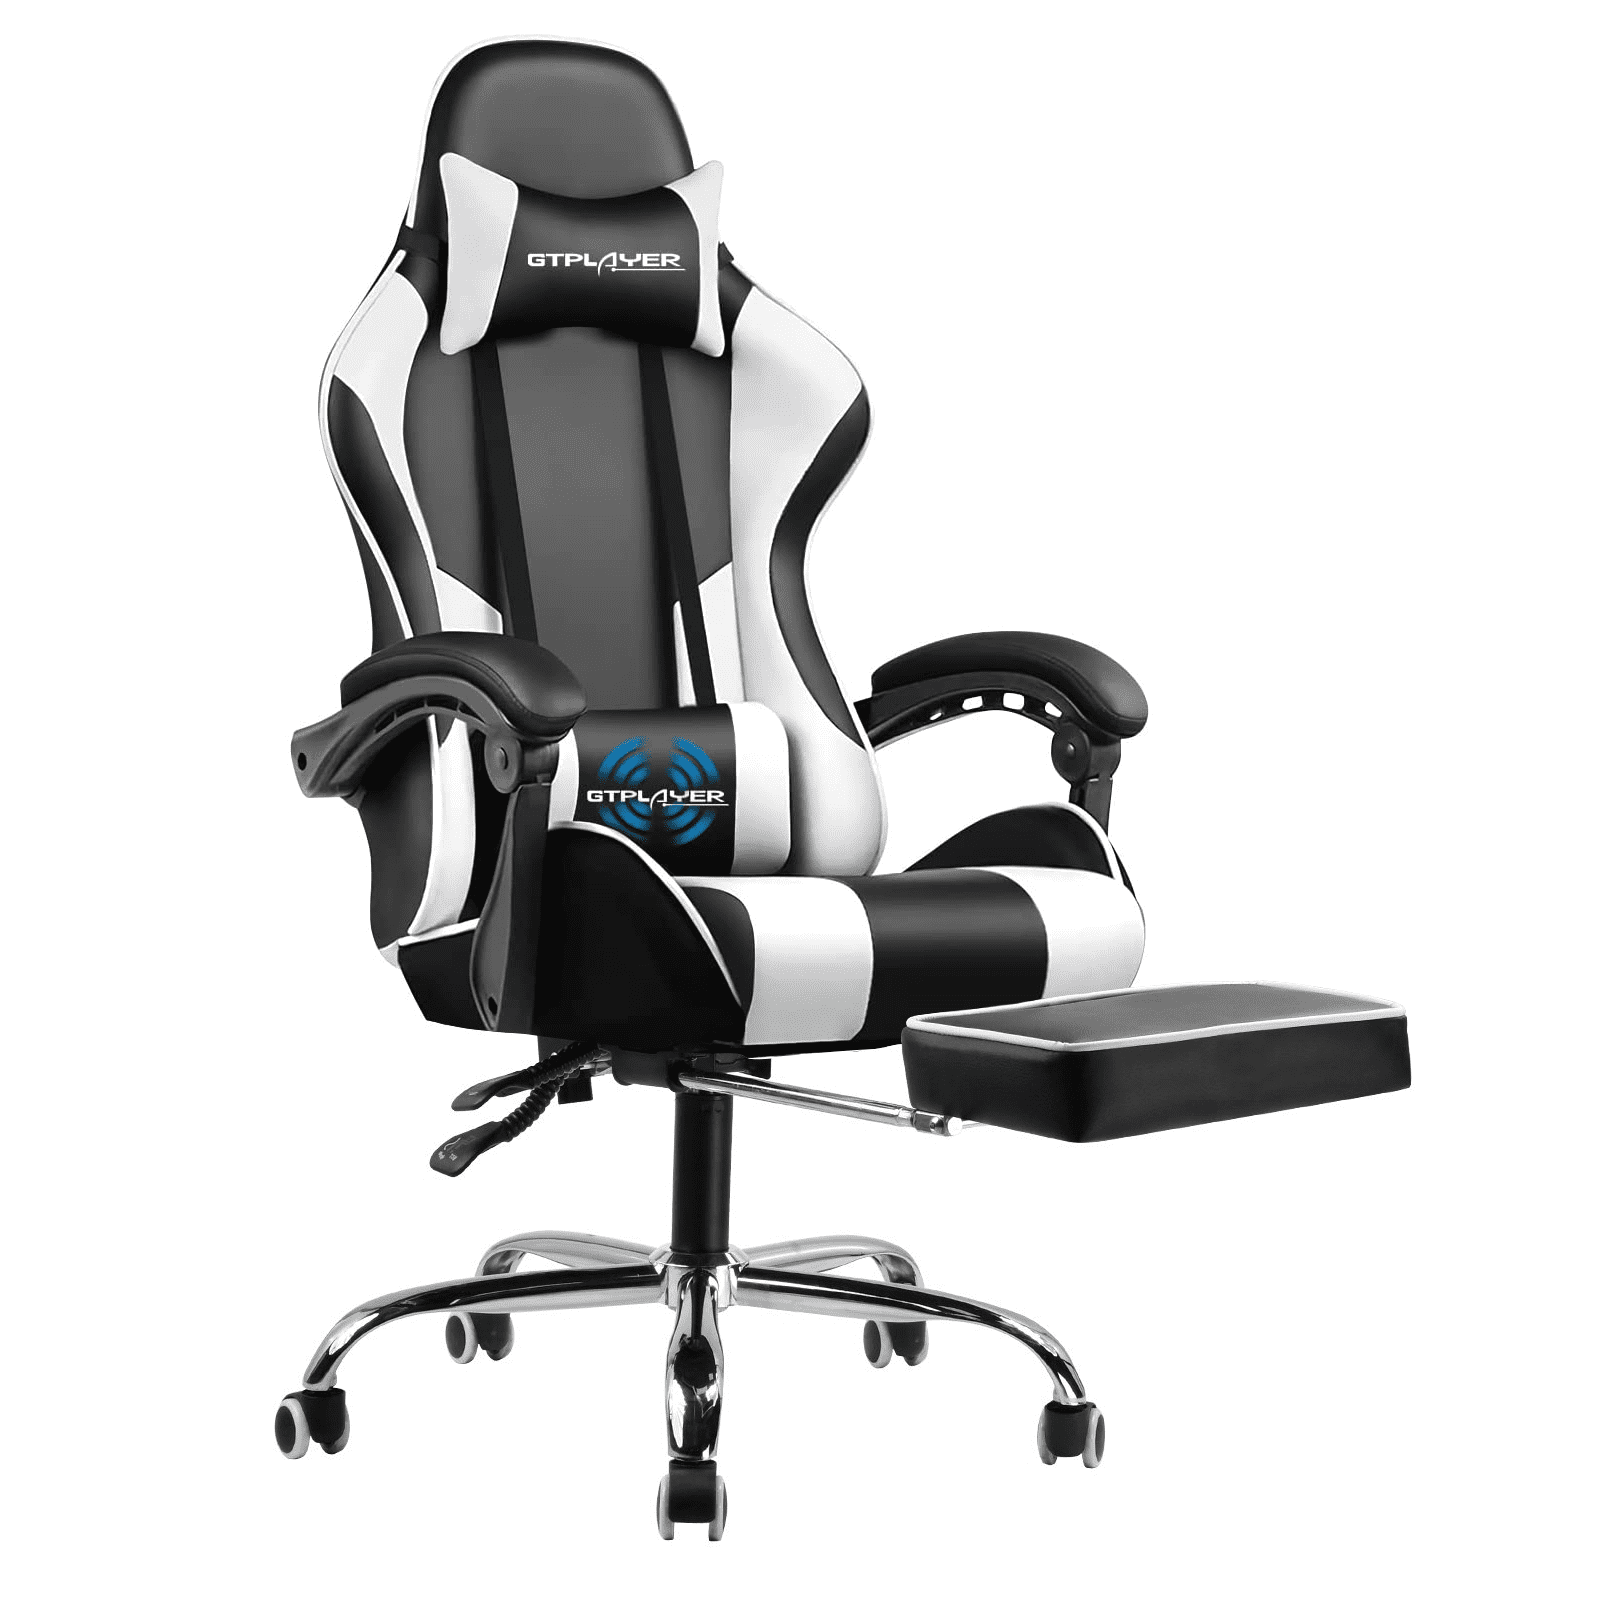 GTRACING Gaming Chair with Footrest and Lumbar Massage Pillow PU Leather Office Chair, White - Walmart.com